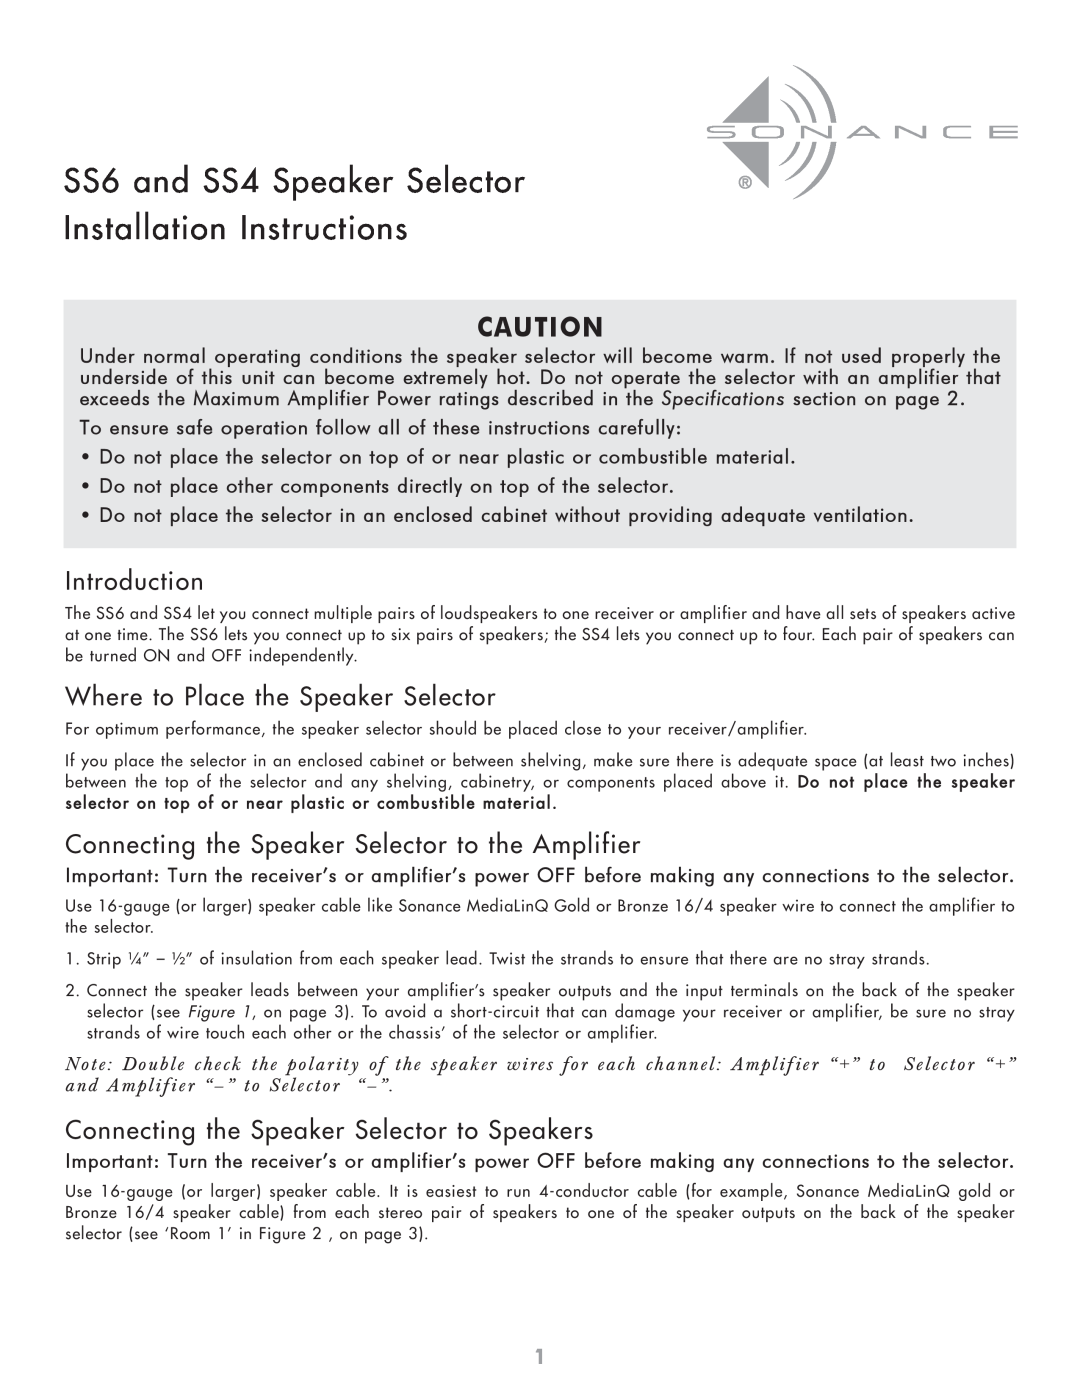 Sonance installation instructions Introduction, Where to Place the Speaker Selector, SS6 and SS4 Speaker Selector 